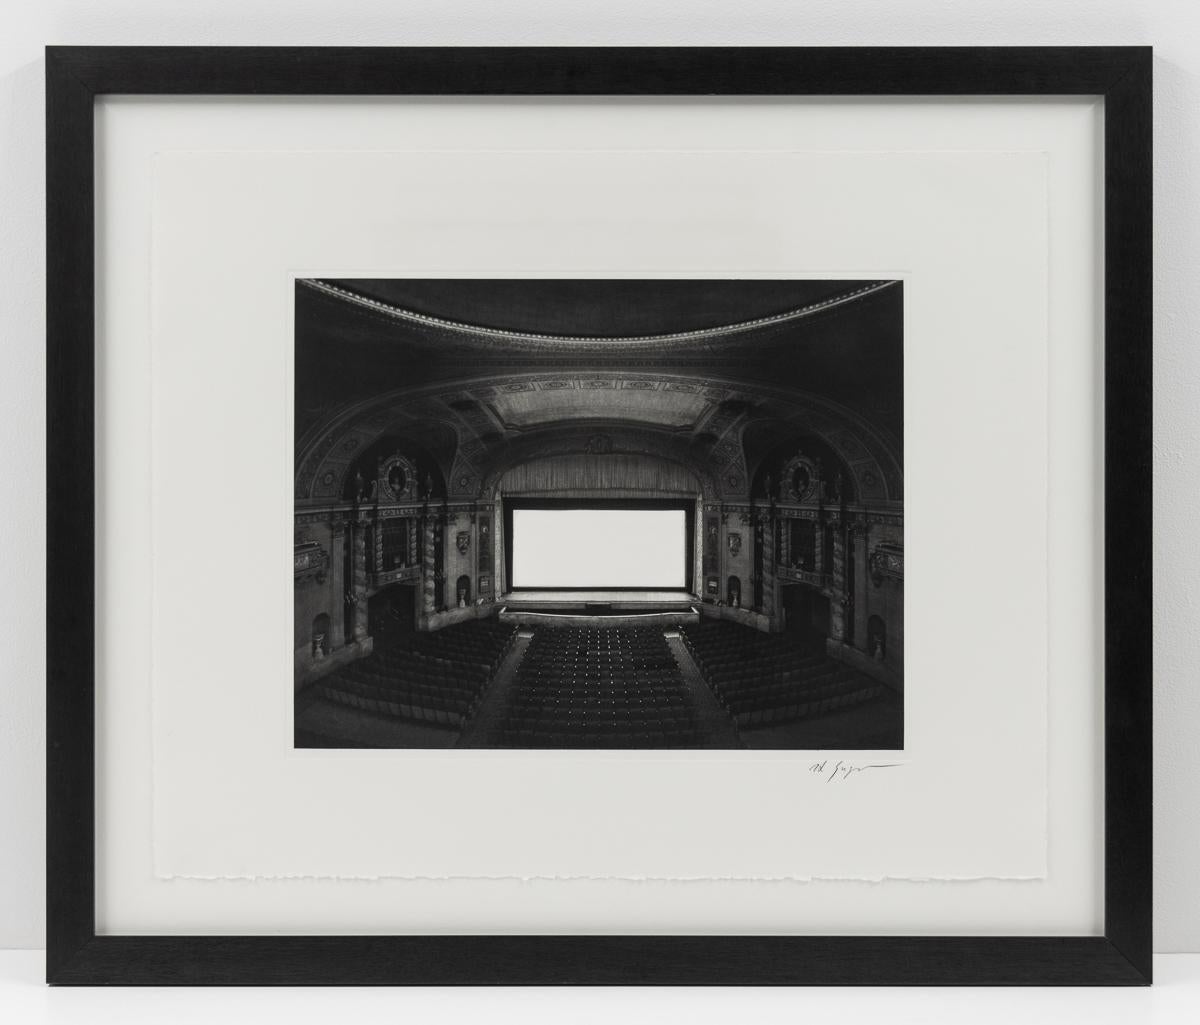 Theatres - Contemporary Photograph by Hiroshi Sugimoto